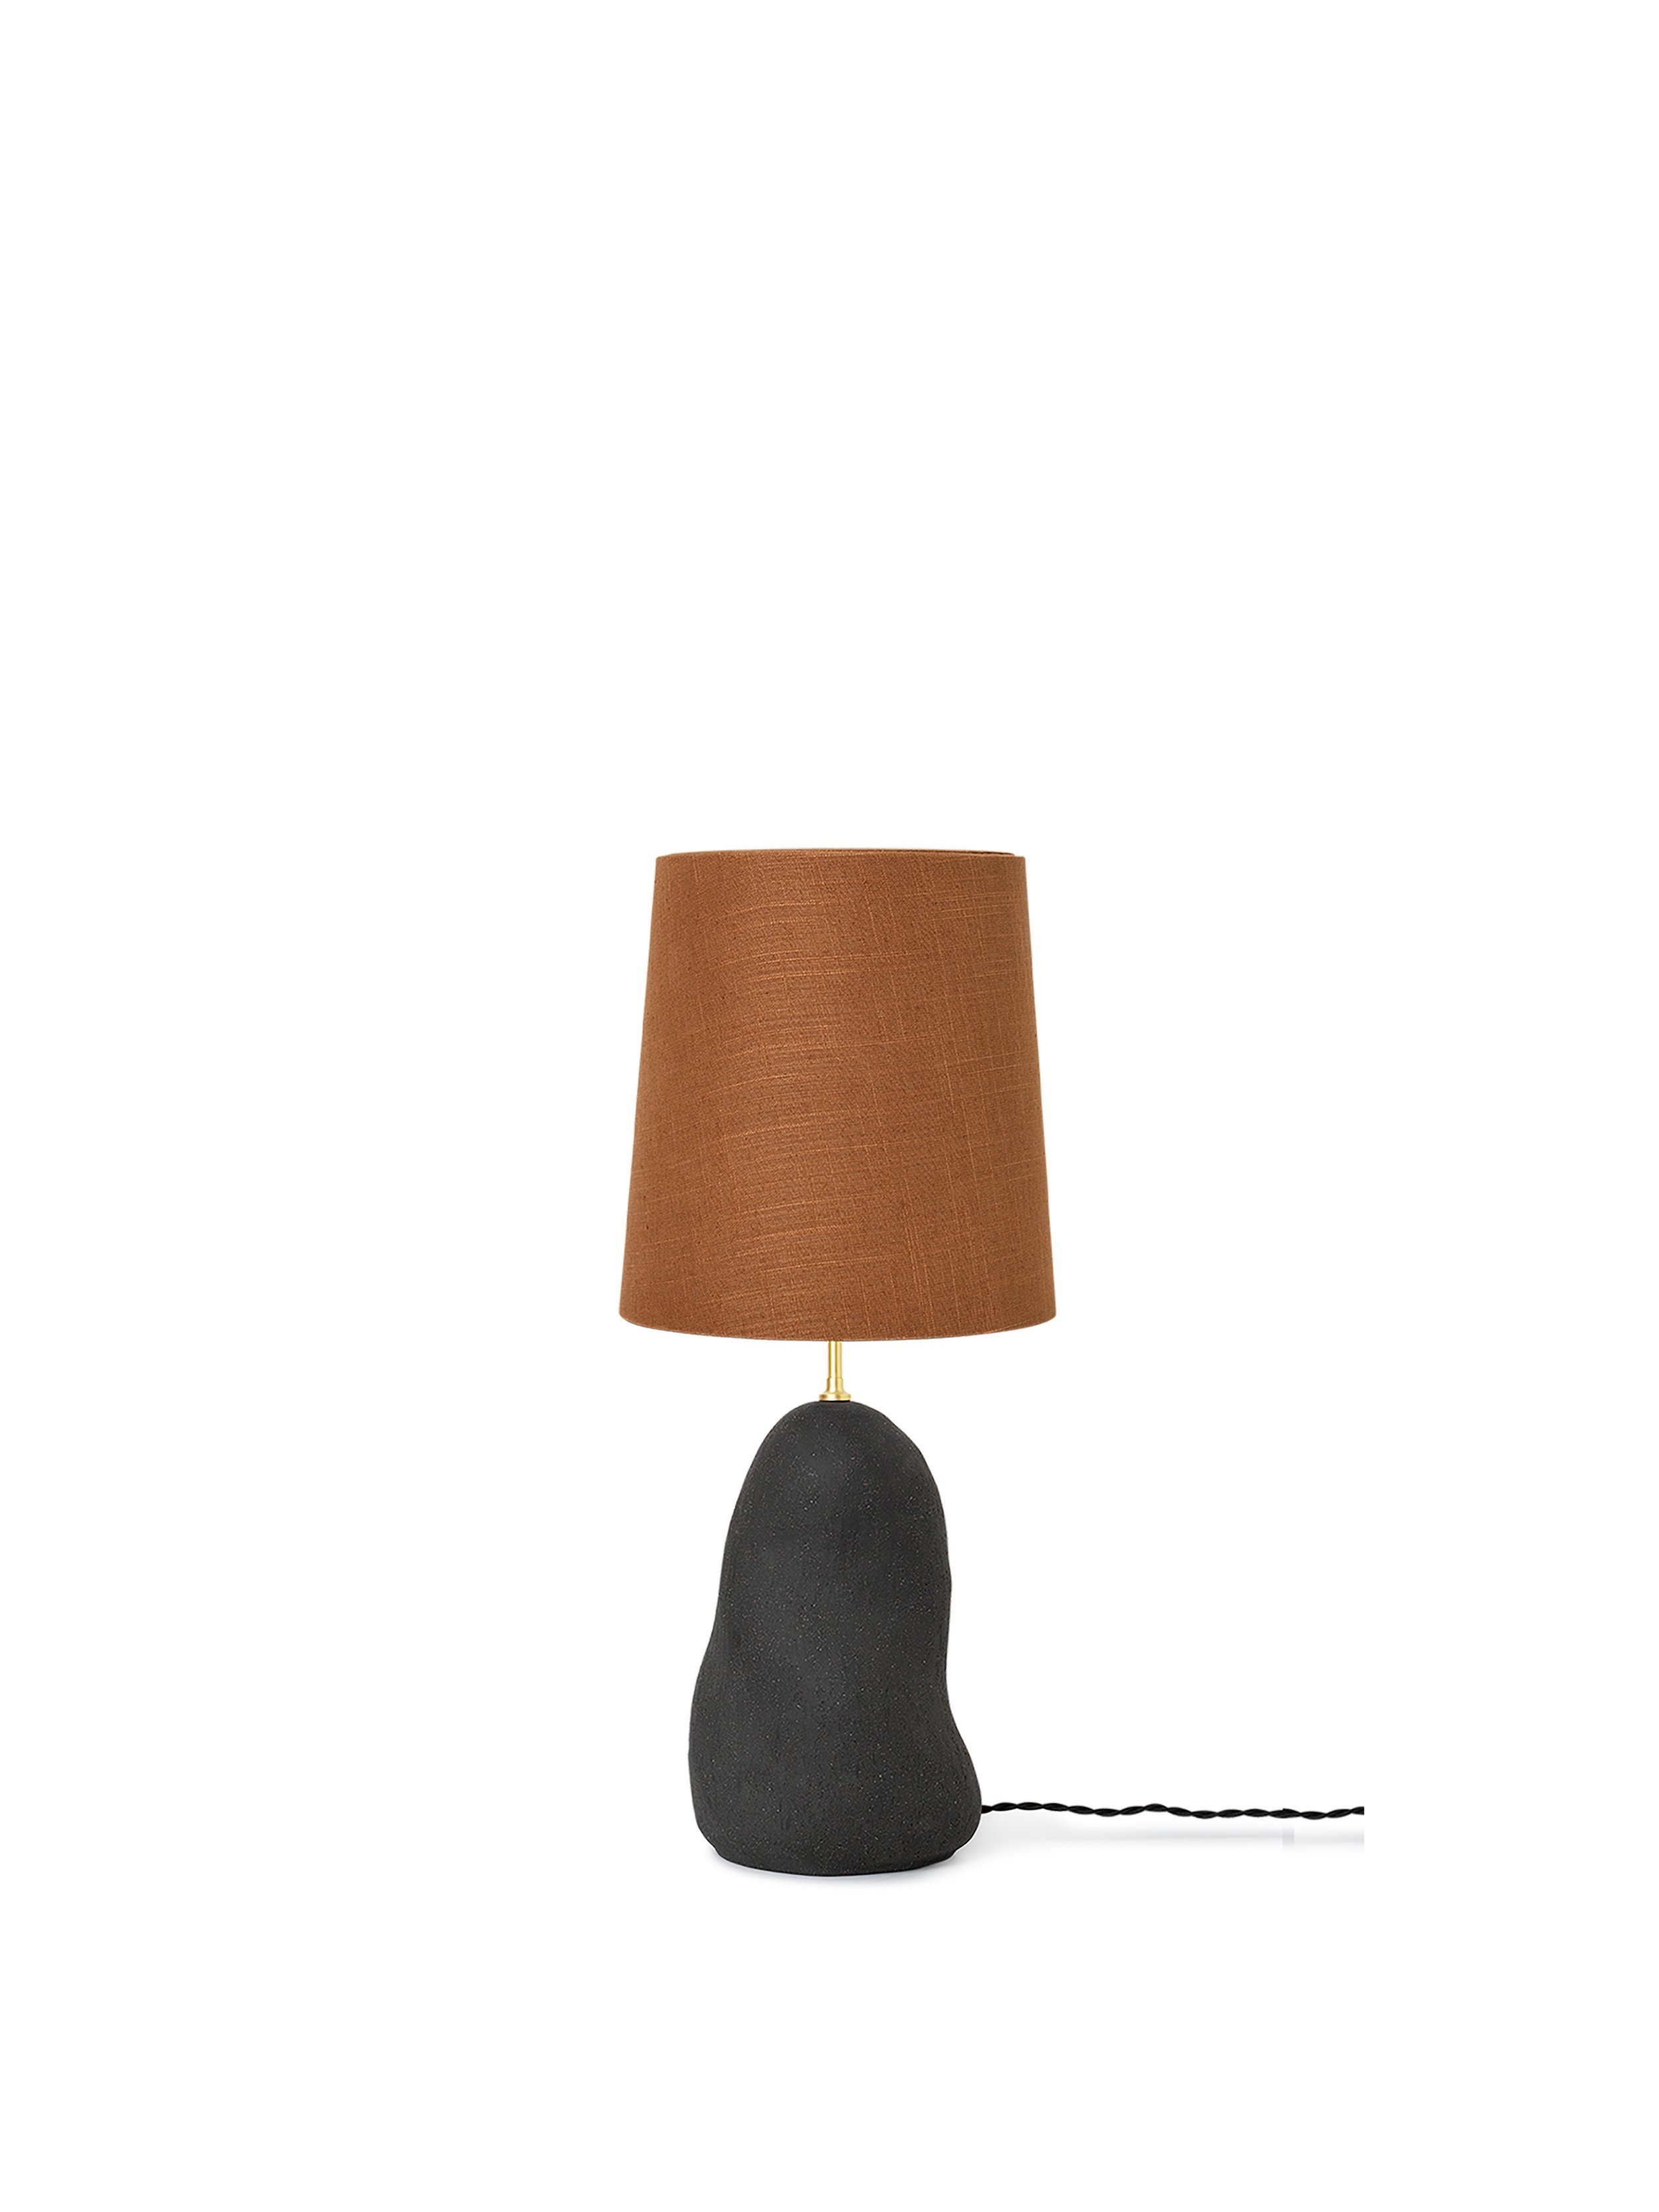 fermLIVING-HebeLampBase-M-Black-EclipseLampshade-M-Curry-100552101-100329302-pack.jpg